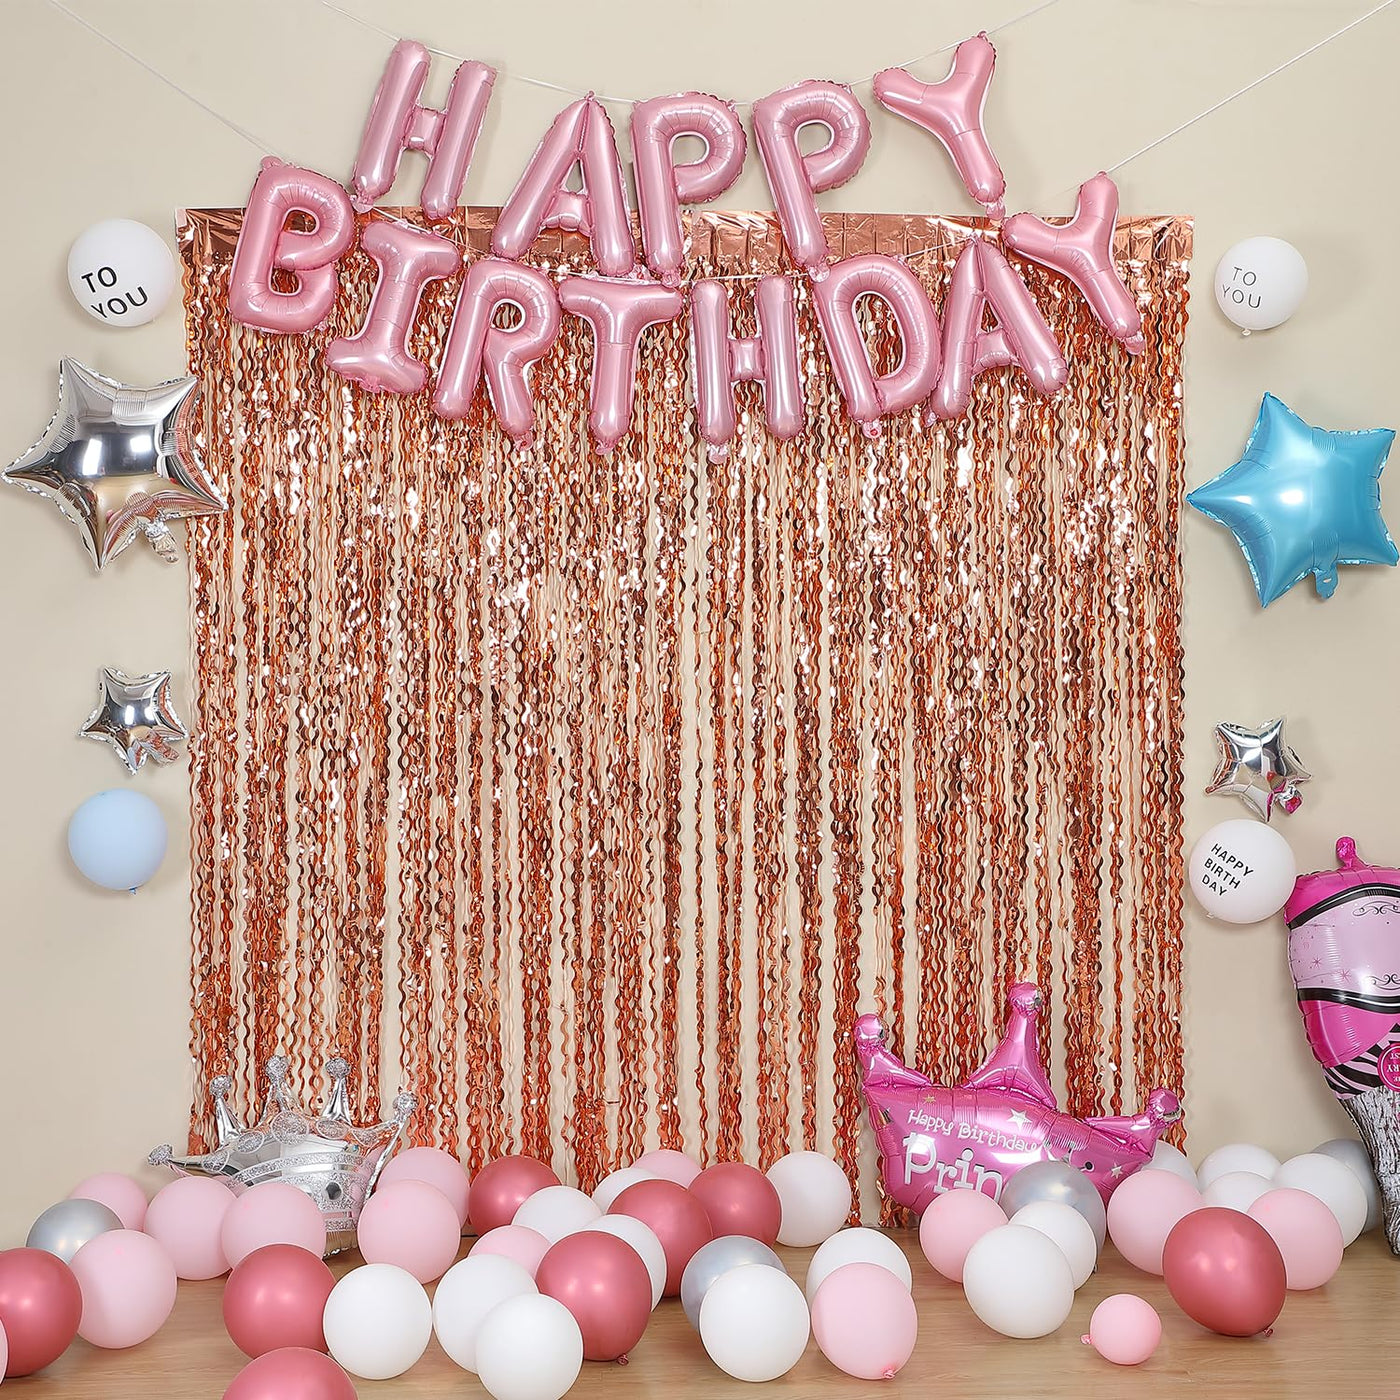 Wavy Rose Gold Fringe Curtain - 3.3 ft x 6.6 Feet, Pack of 3 | Rose Gold Party Decorations,Rose Gold Streamers,Rose Gold Tinsel Streamers for Birthday Backdrop